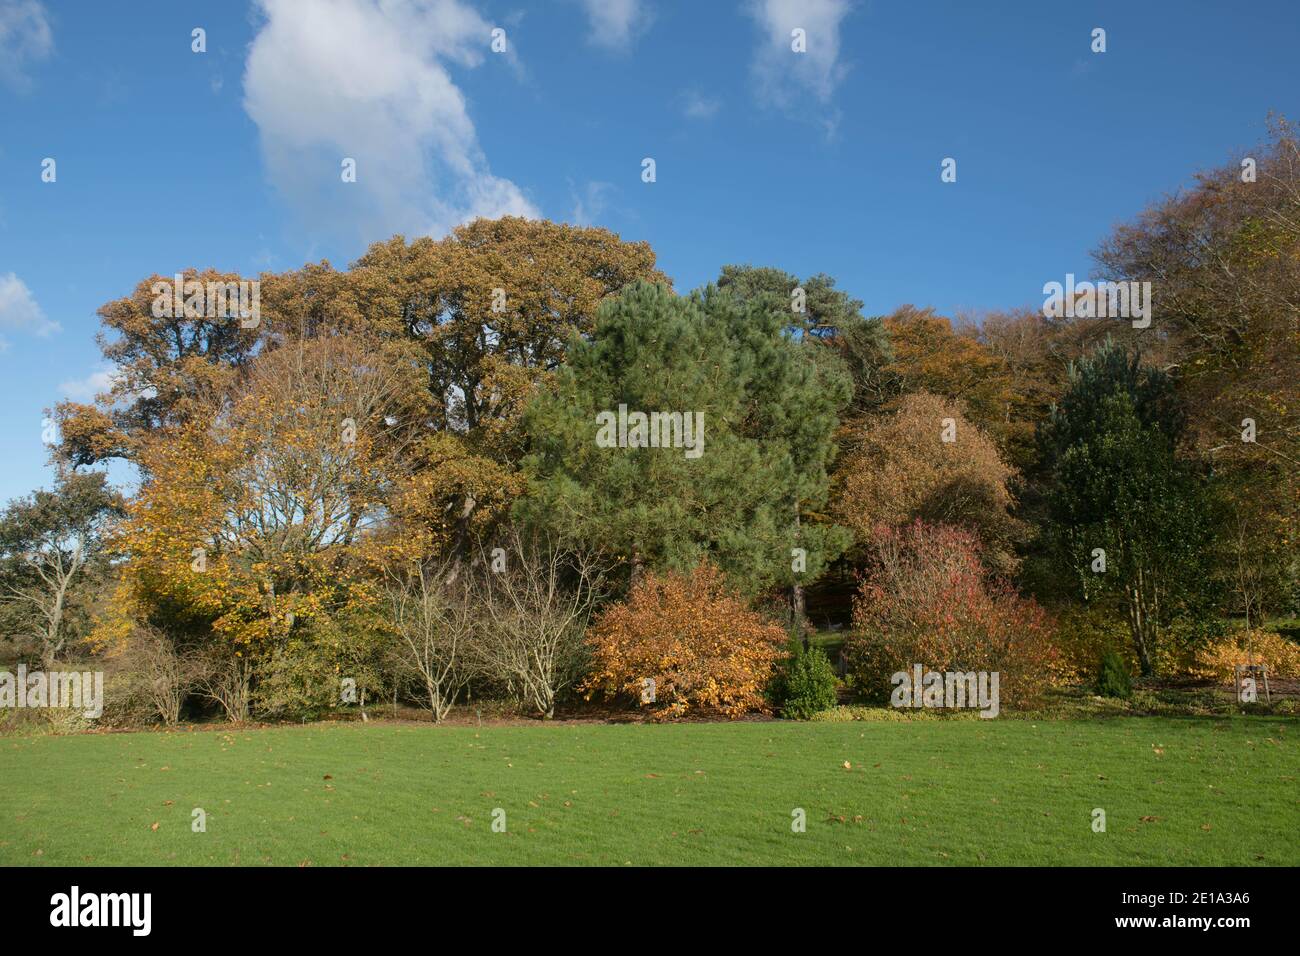 Stunning Autumn Colours on Deciduous and Evergreen Trees in a Woodland Landscape at Rosemoor in Rural Devon, England, UK Stock Photo